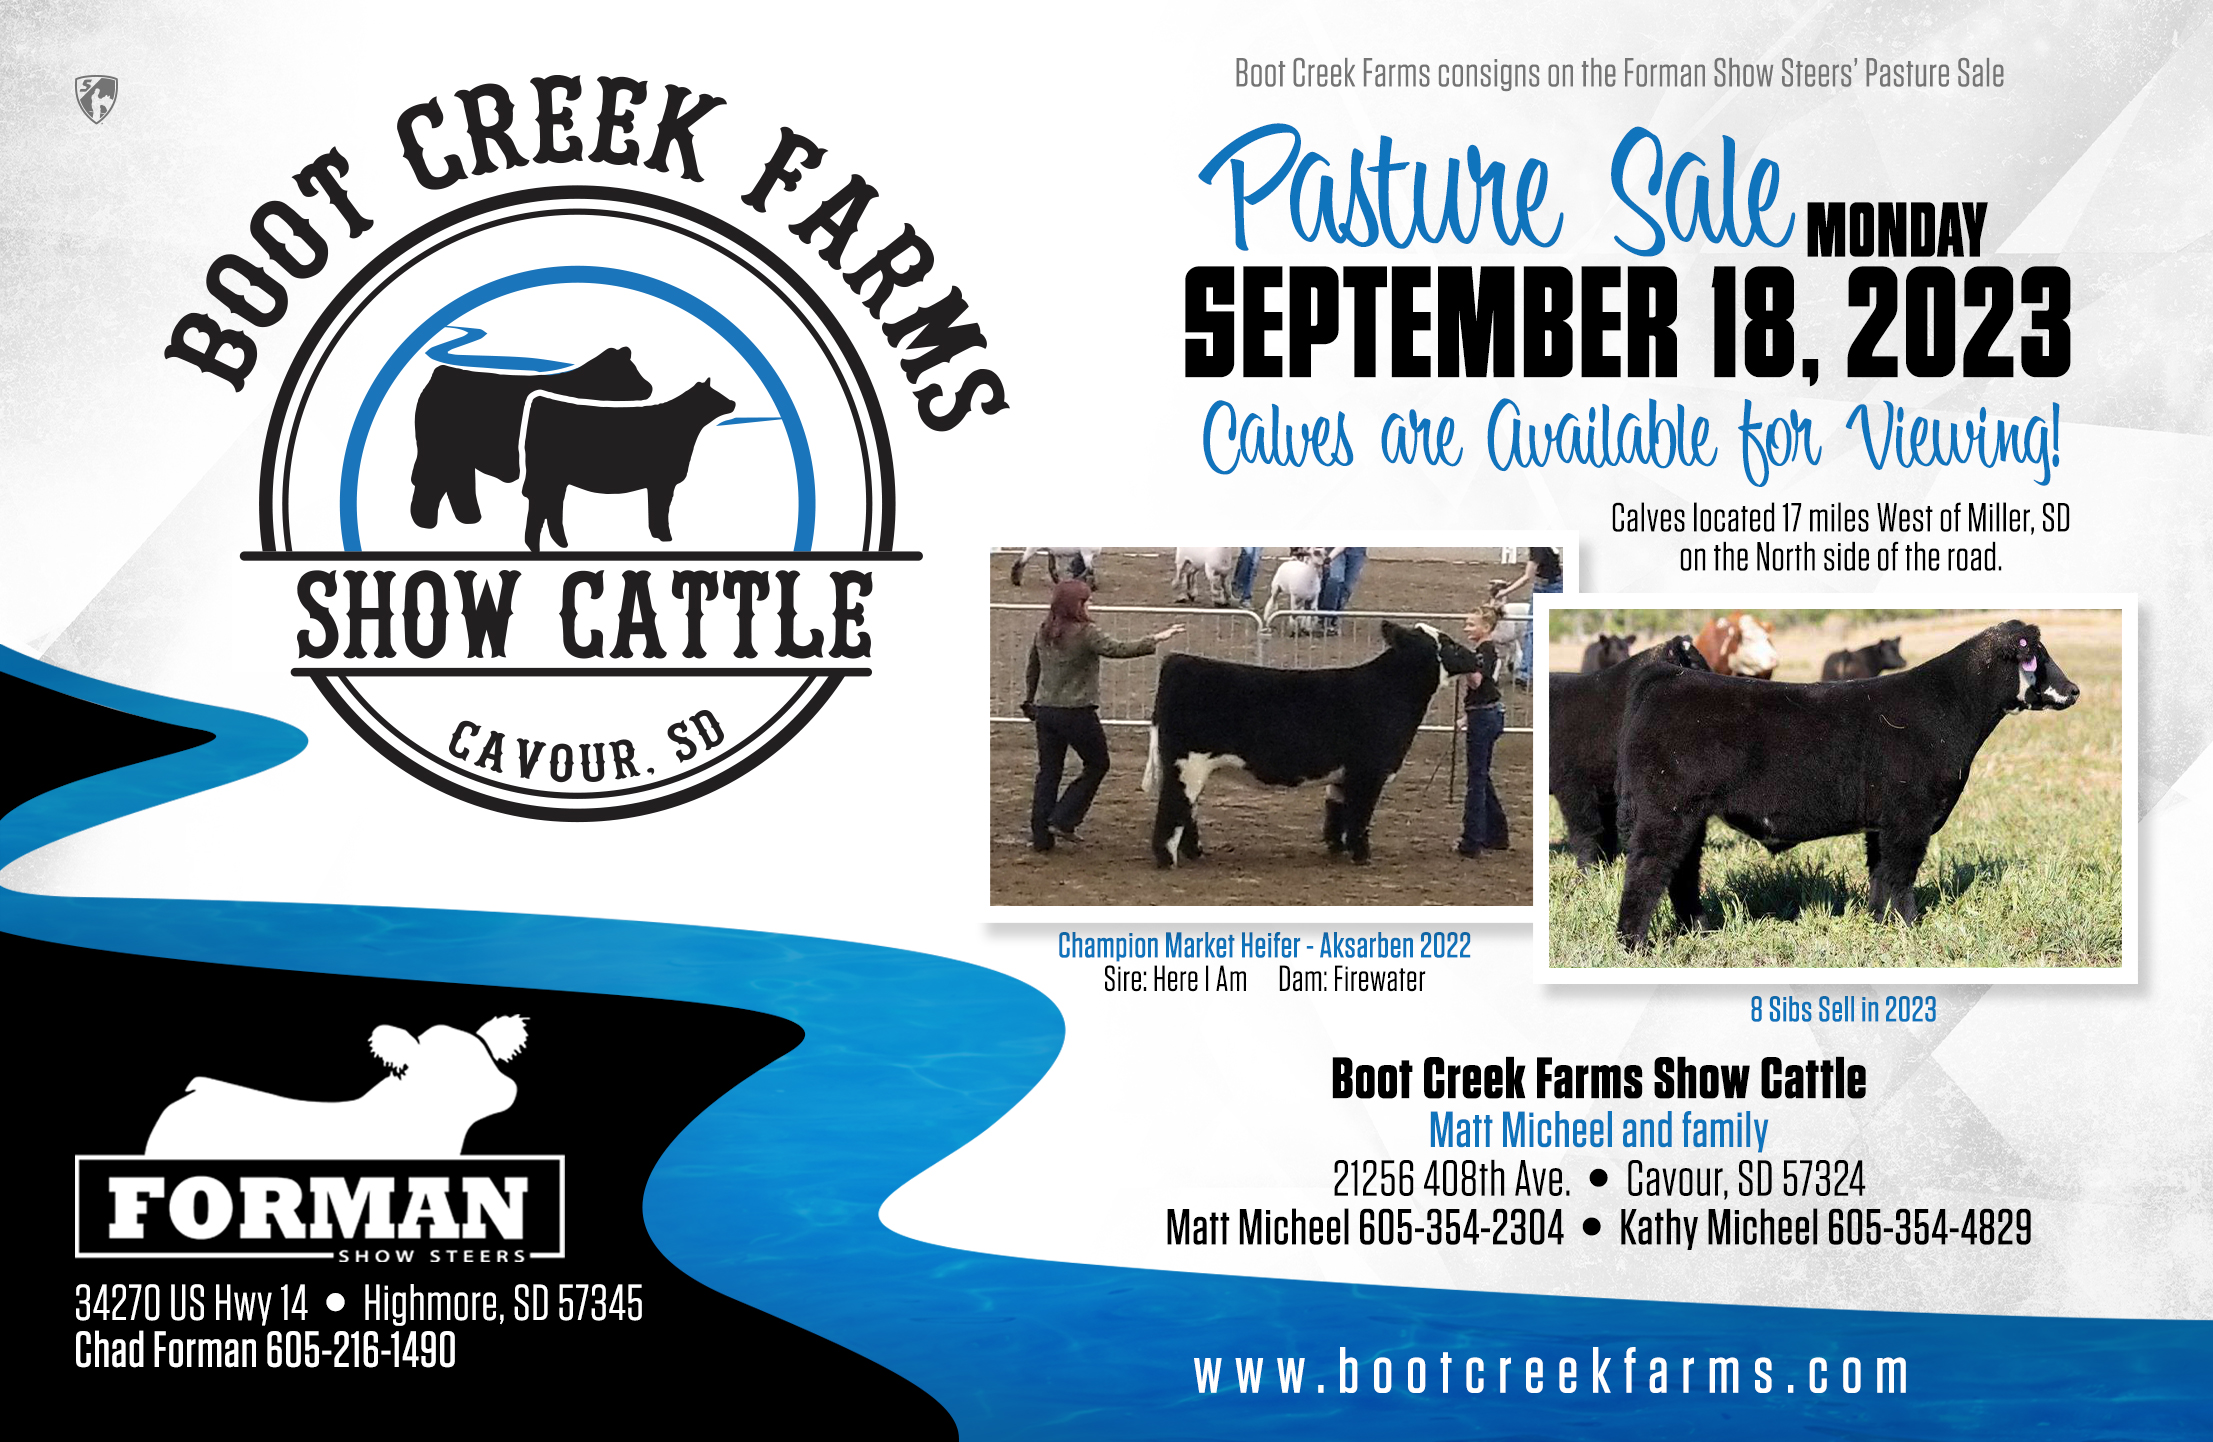 Our Flyer - The slap - Aksarben 2022 - Pasture Sale Steer Calf - Forman Show Steers - Boot Creek Farms Show Cattle - Ree Heights, SD